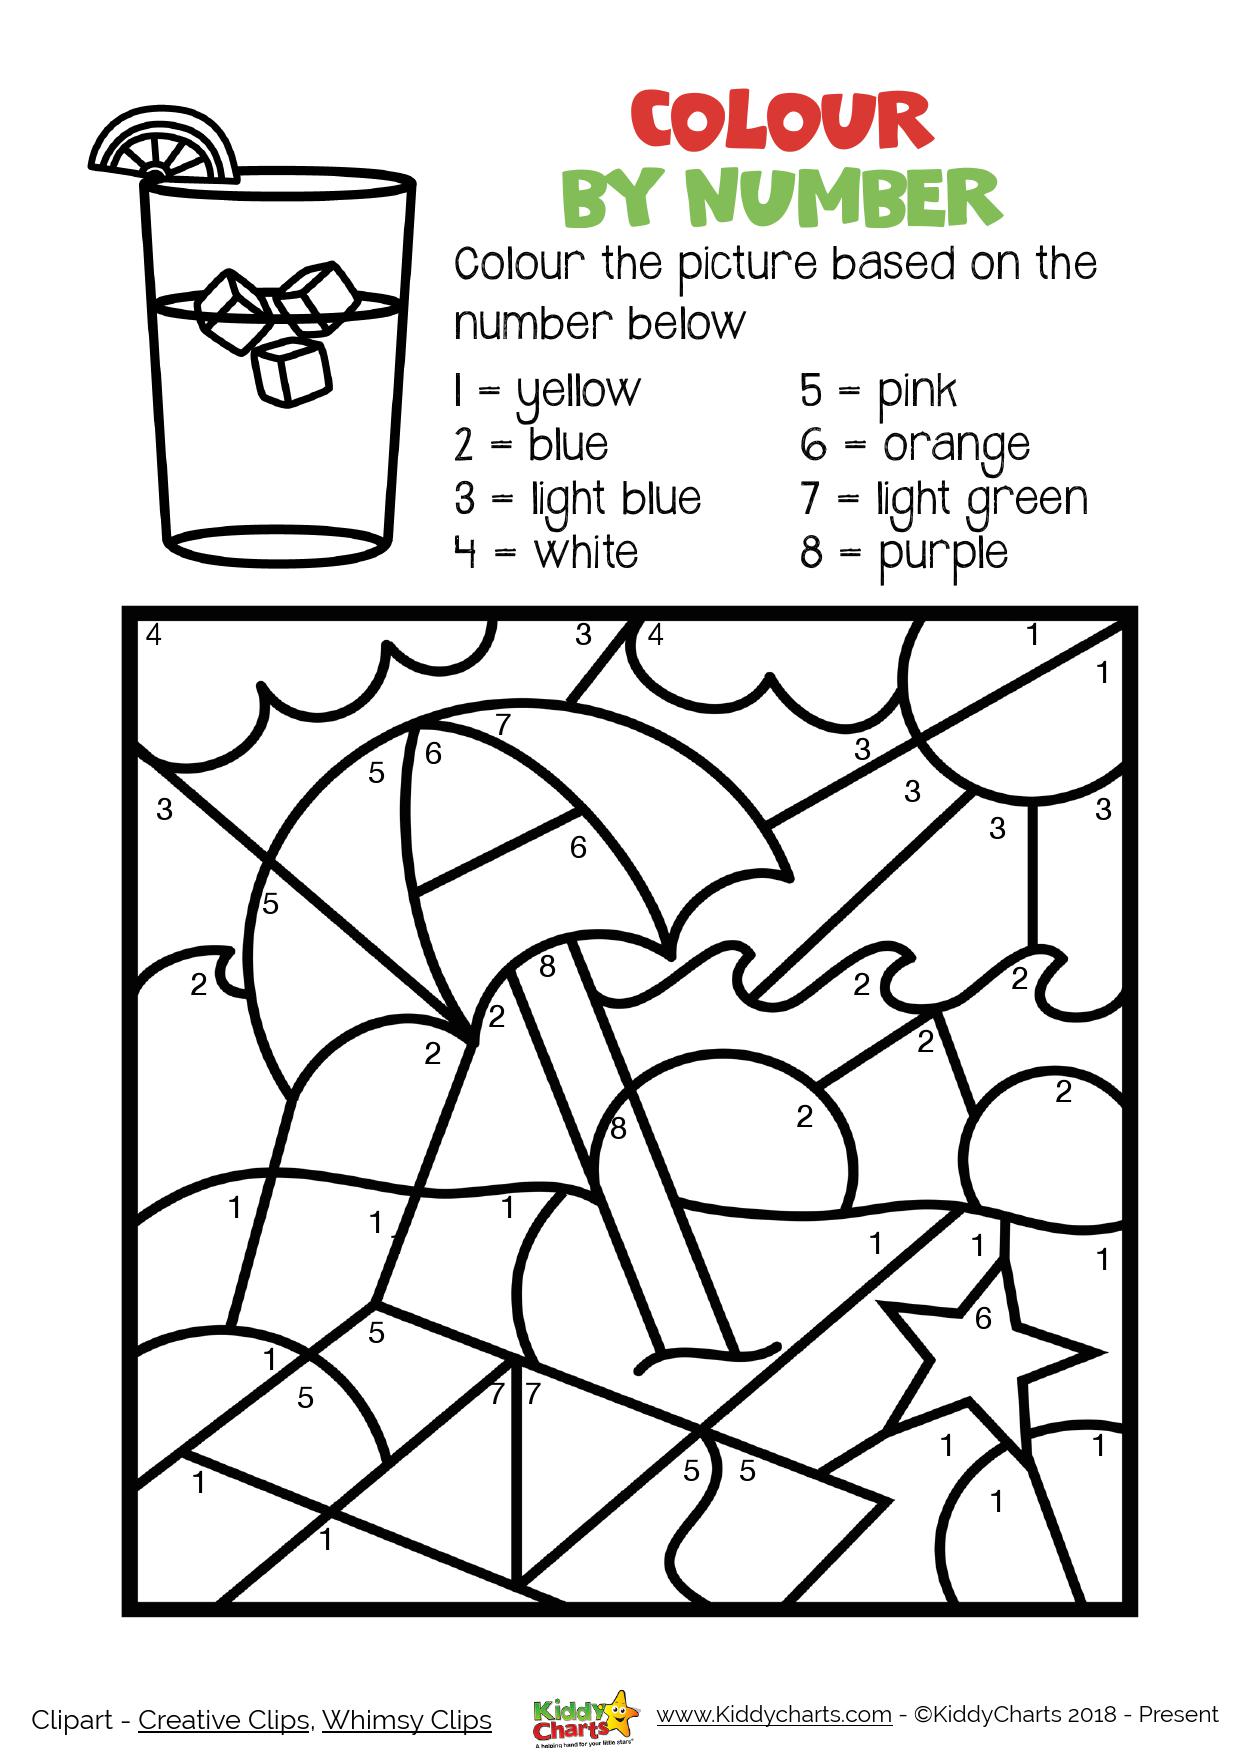 Summer colouring sheet - colour by numbers. More on the site #printables #summer #coloring